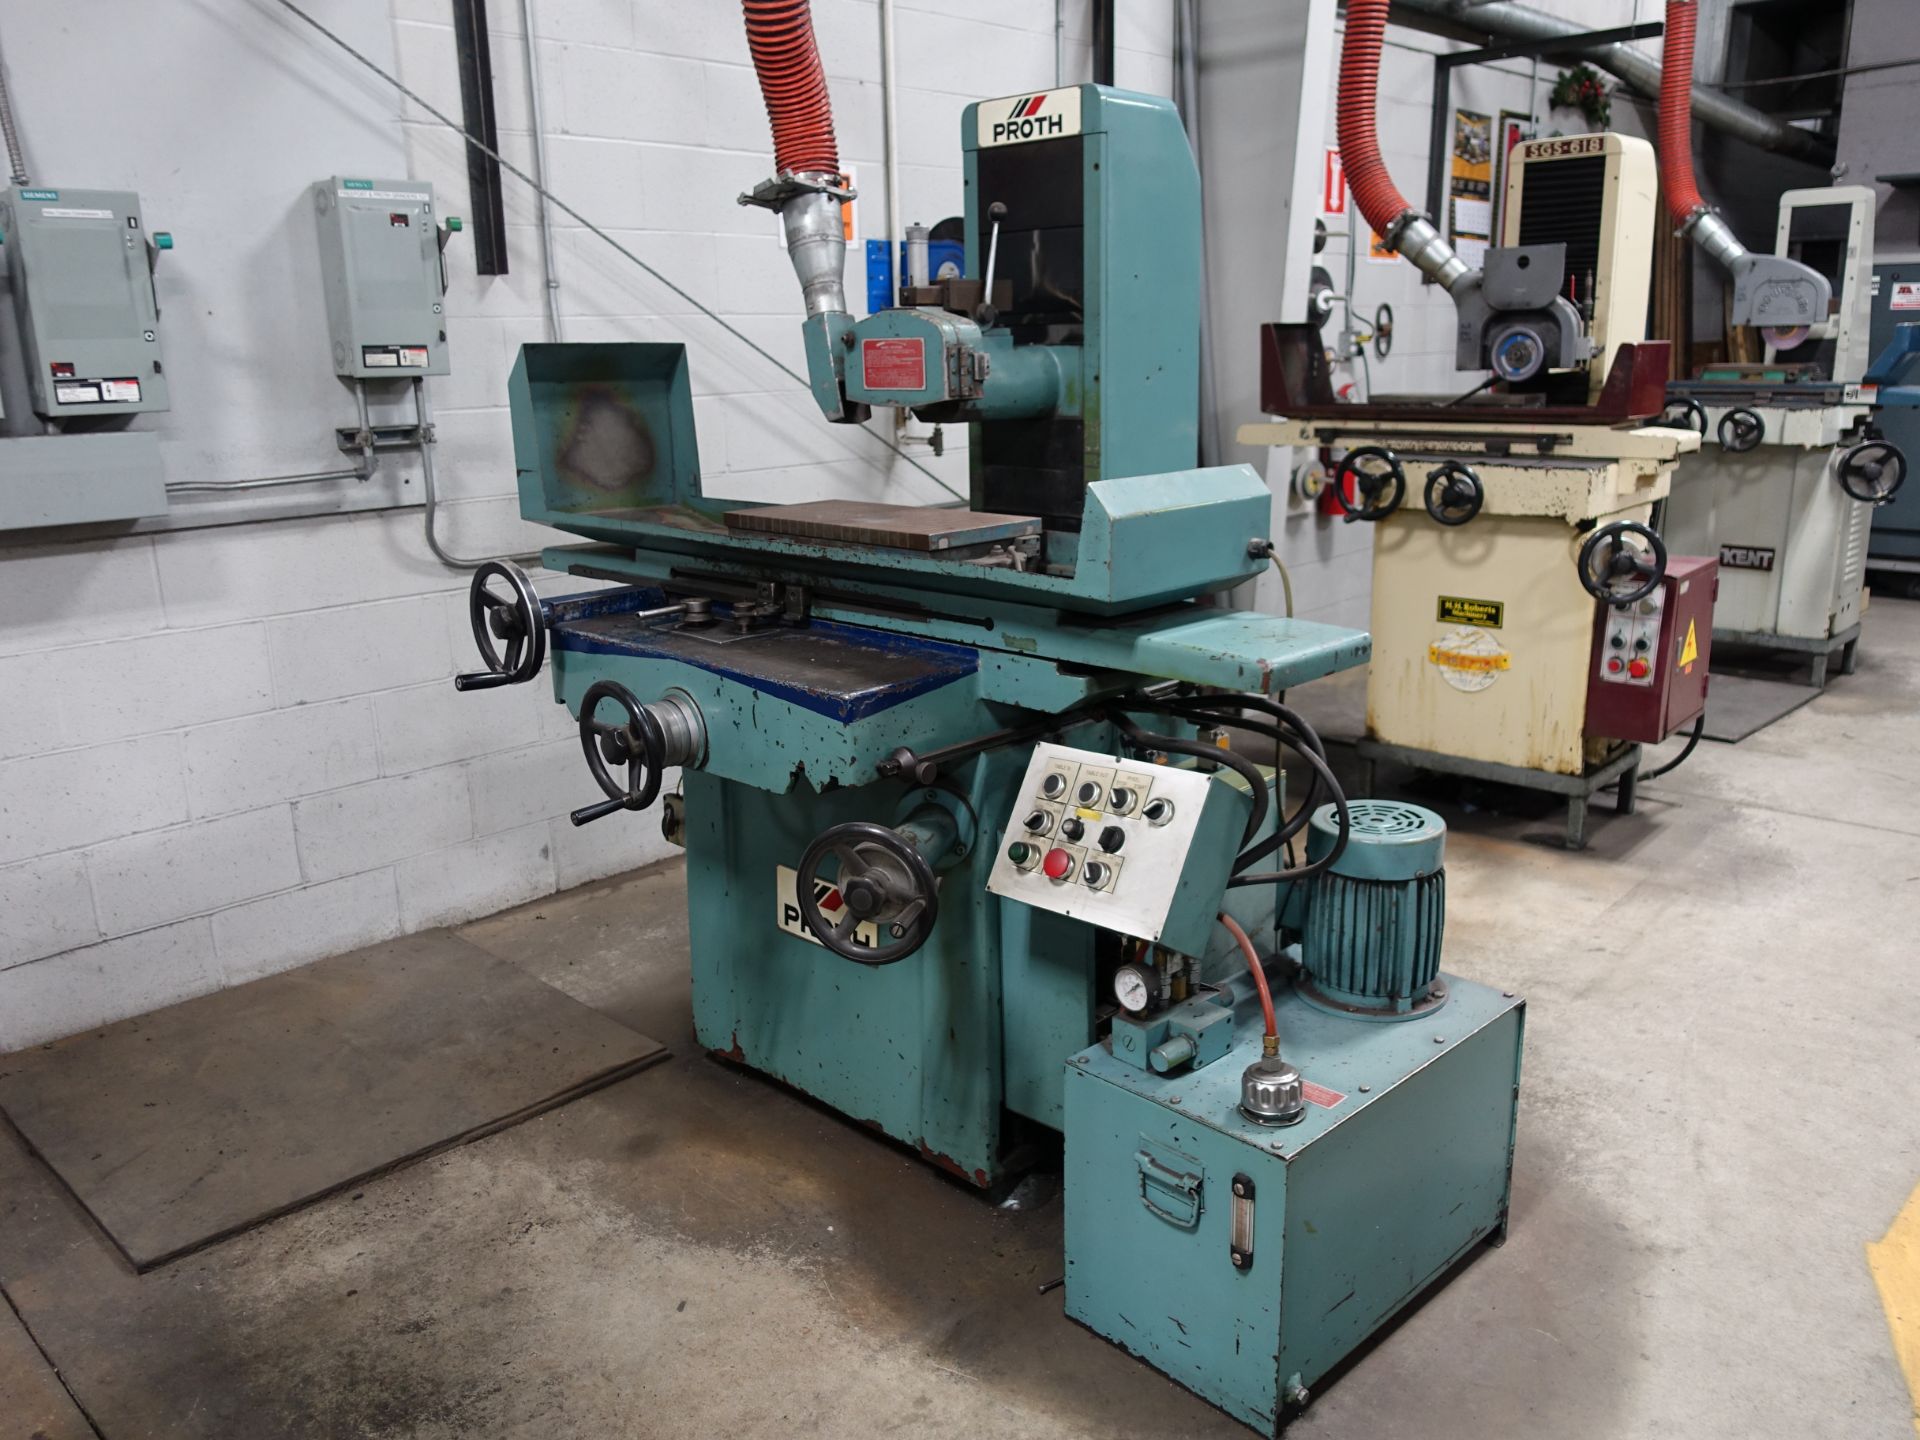 PROTH, PSGSPROTH, PSGS-2550AH, 25" X 50", SURFACE GRINDER, S/N 509227-1-2550AH, 25" X 50", SURFACE - Image 2 of 3